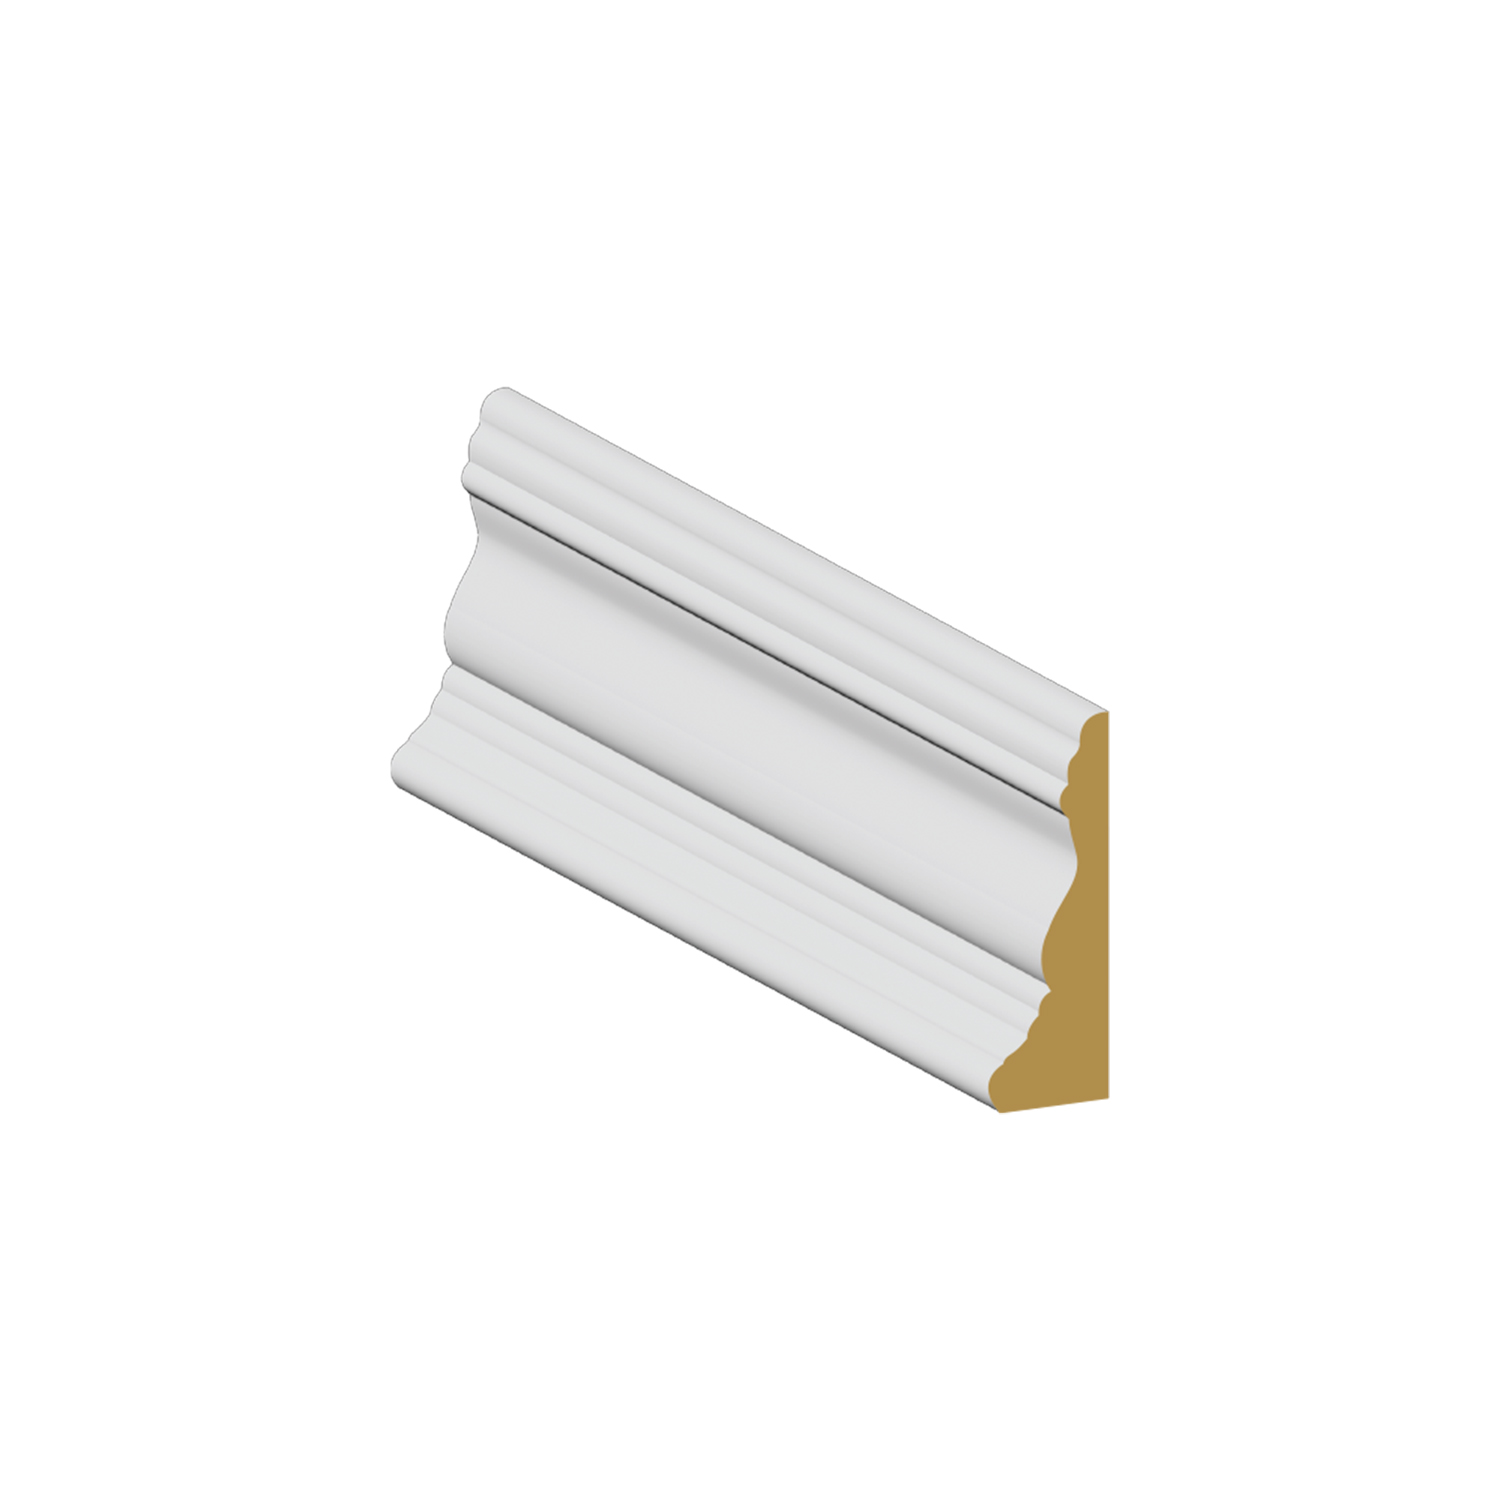 Casing MDF Colonial Back Band 3 x 1 x 86 - $1.18/LF - SOLD PER PIECE - EACH PIECE IS 86'' - $8.49 EACH